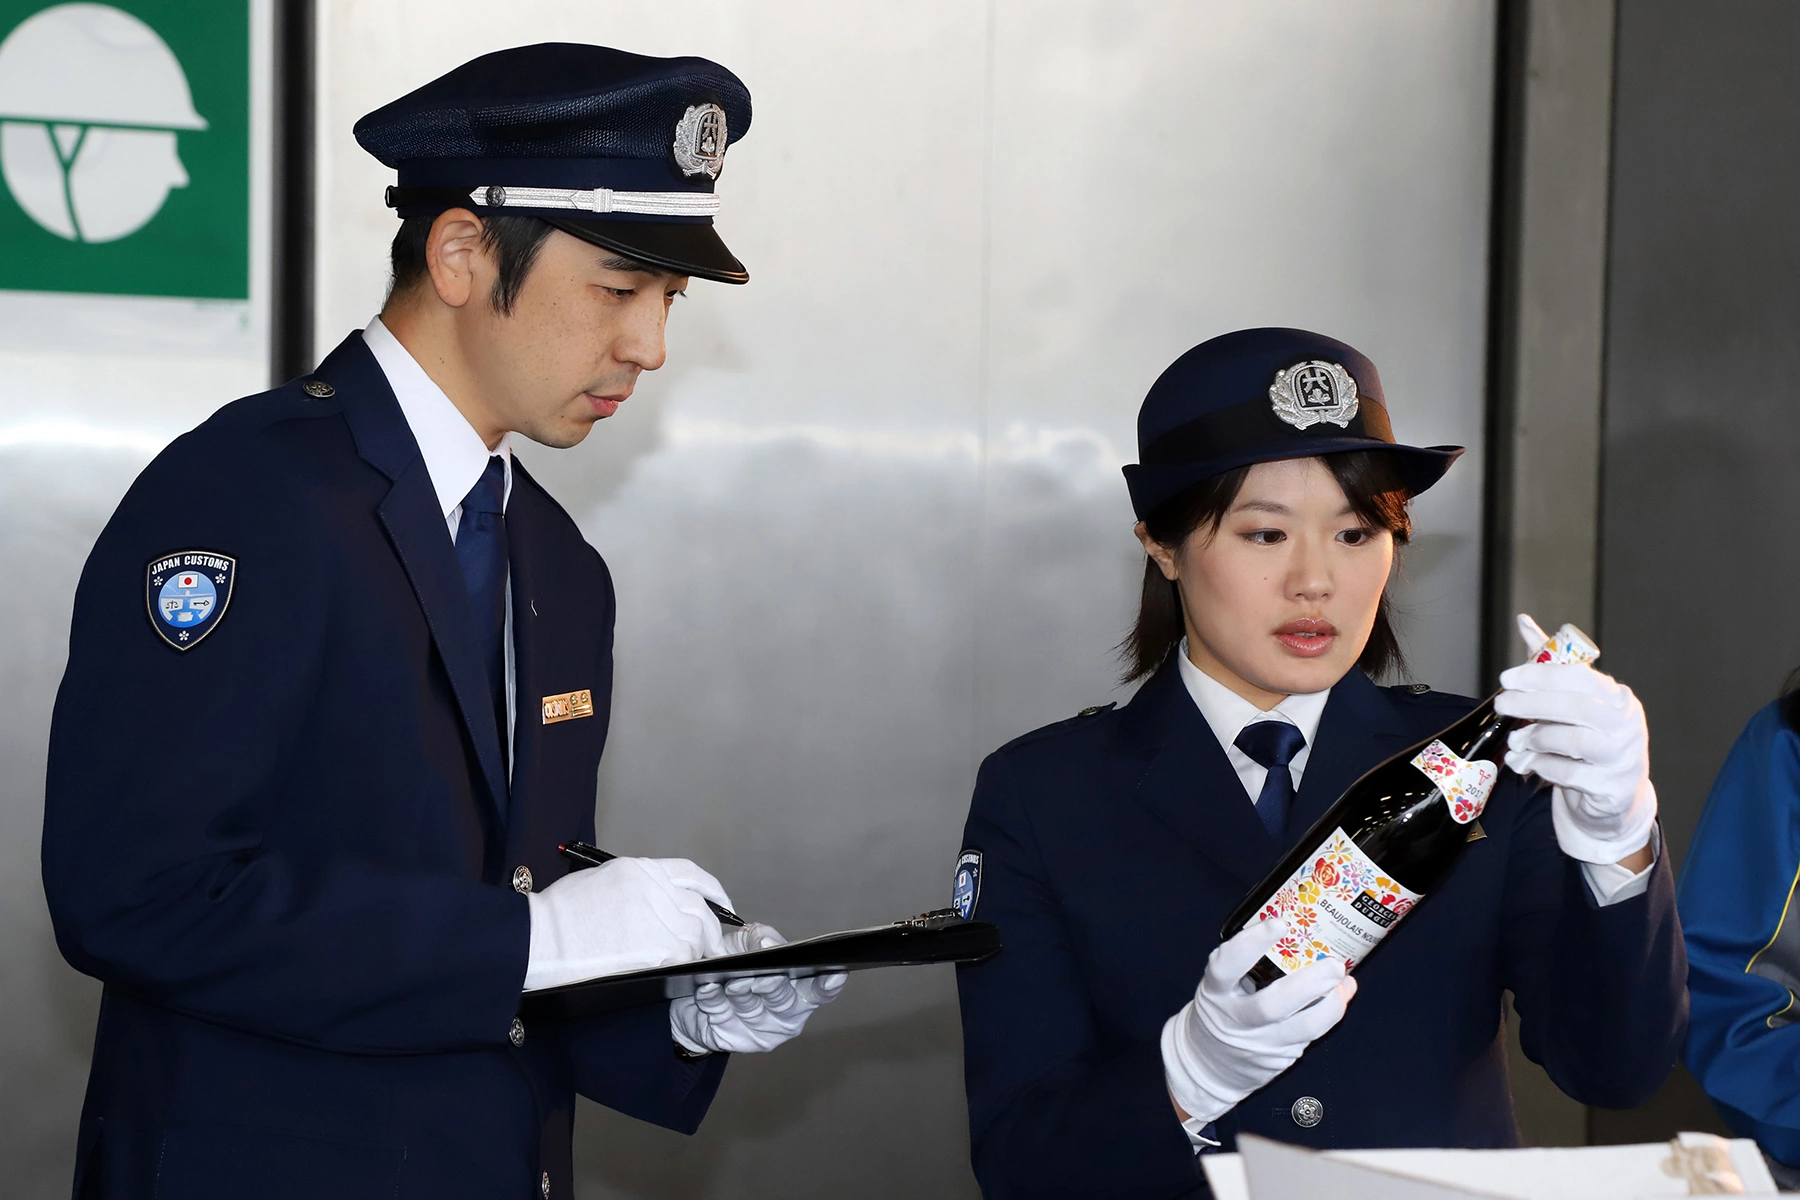 Japanese customs officers checking a bottle of wine